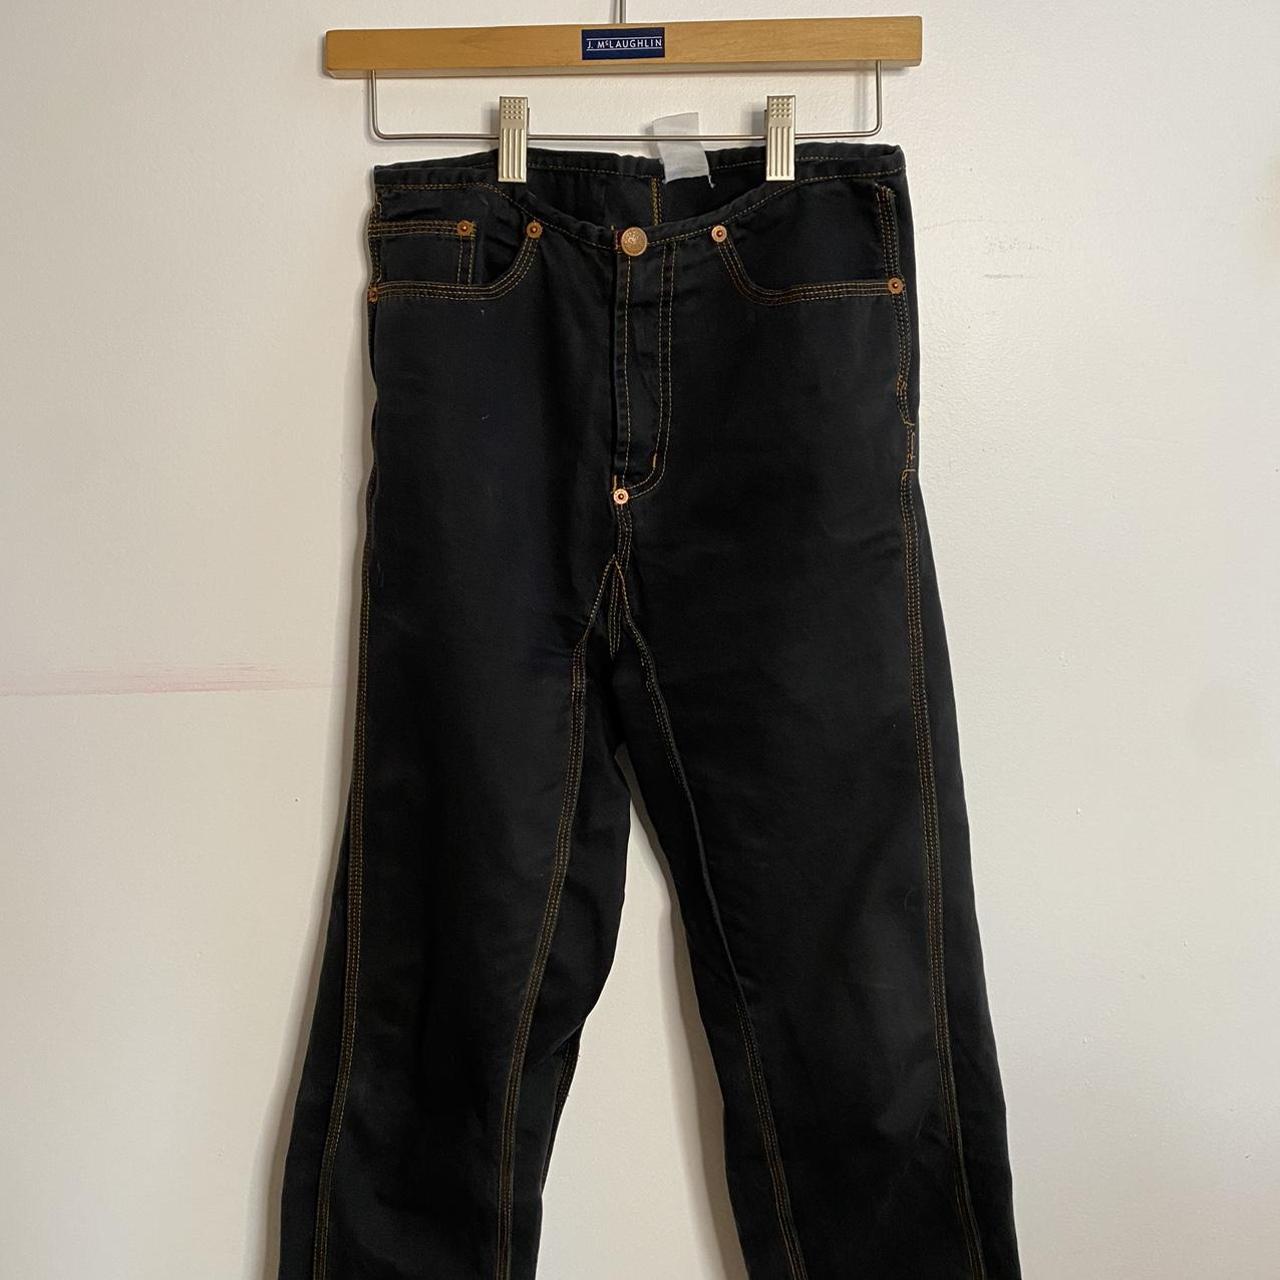 Gaultier Jeans Women's Black and Brown Jeans (2)